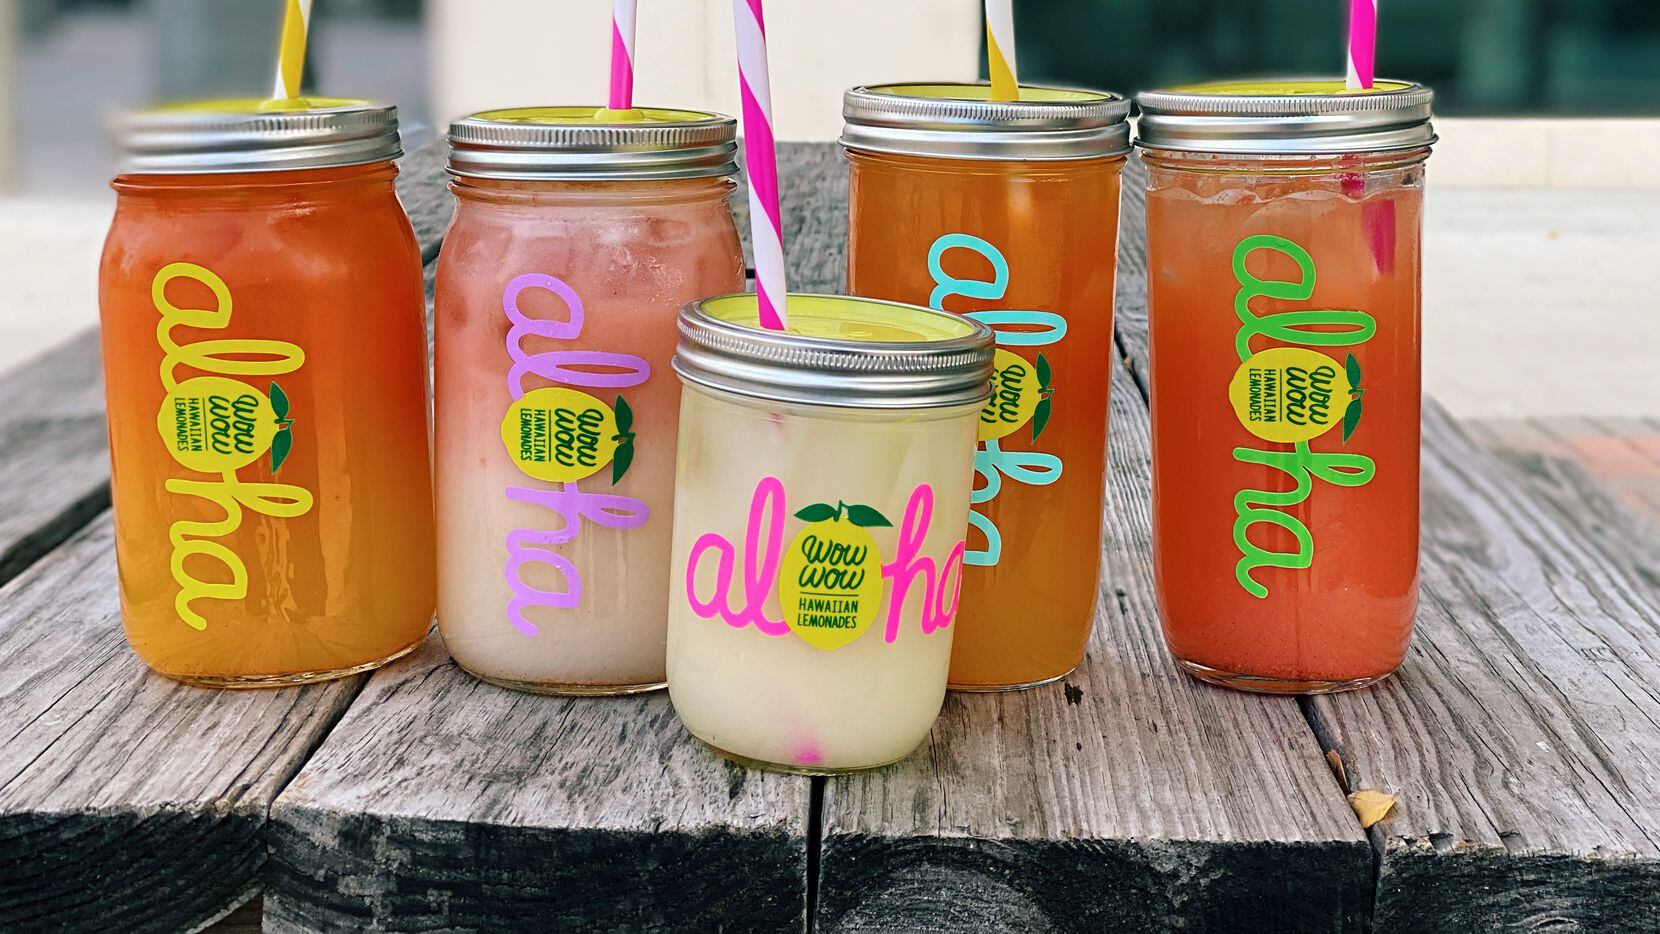 Wow Wow Hawaiian Lemonade is an acai bowl and lemonade shop that opened in Hawaii in 2012. The first one in Texas is expected to open by early 2022, in Oak Cliff.